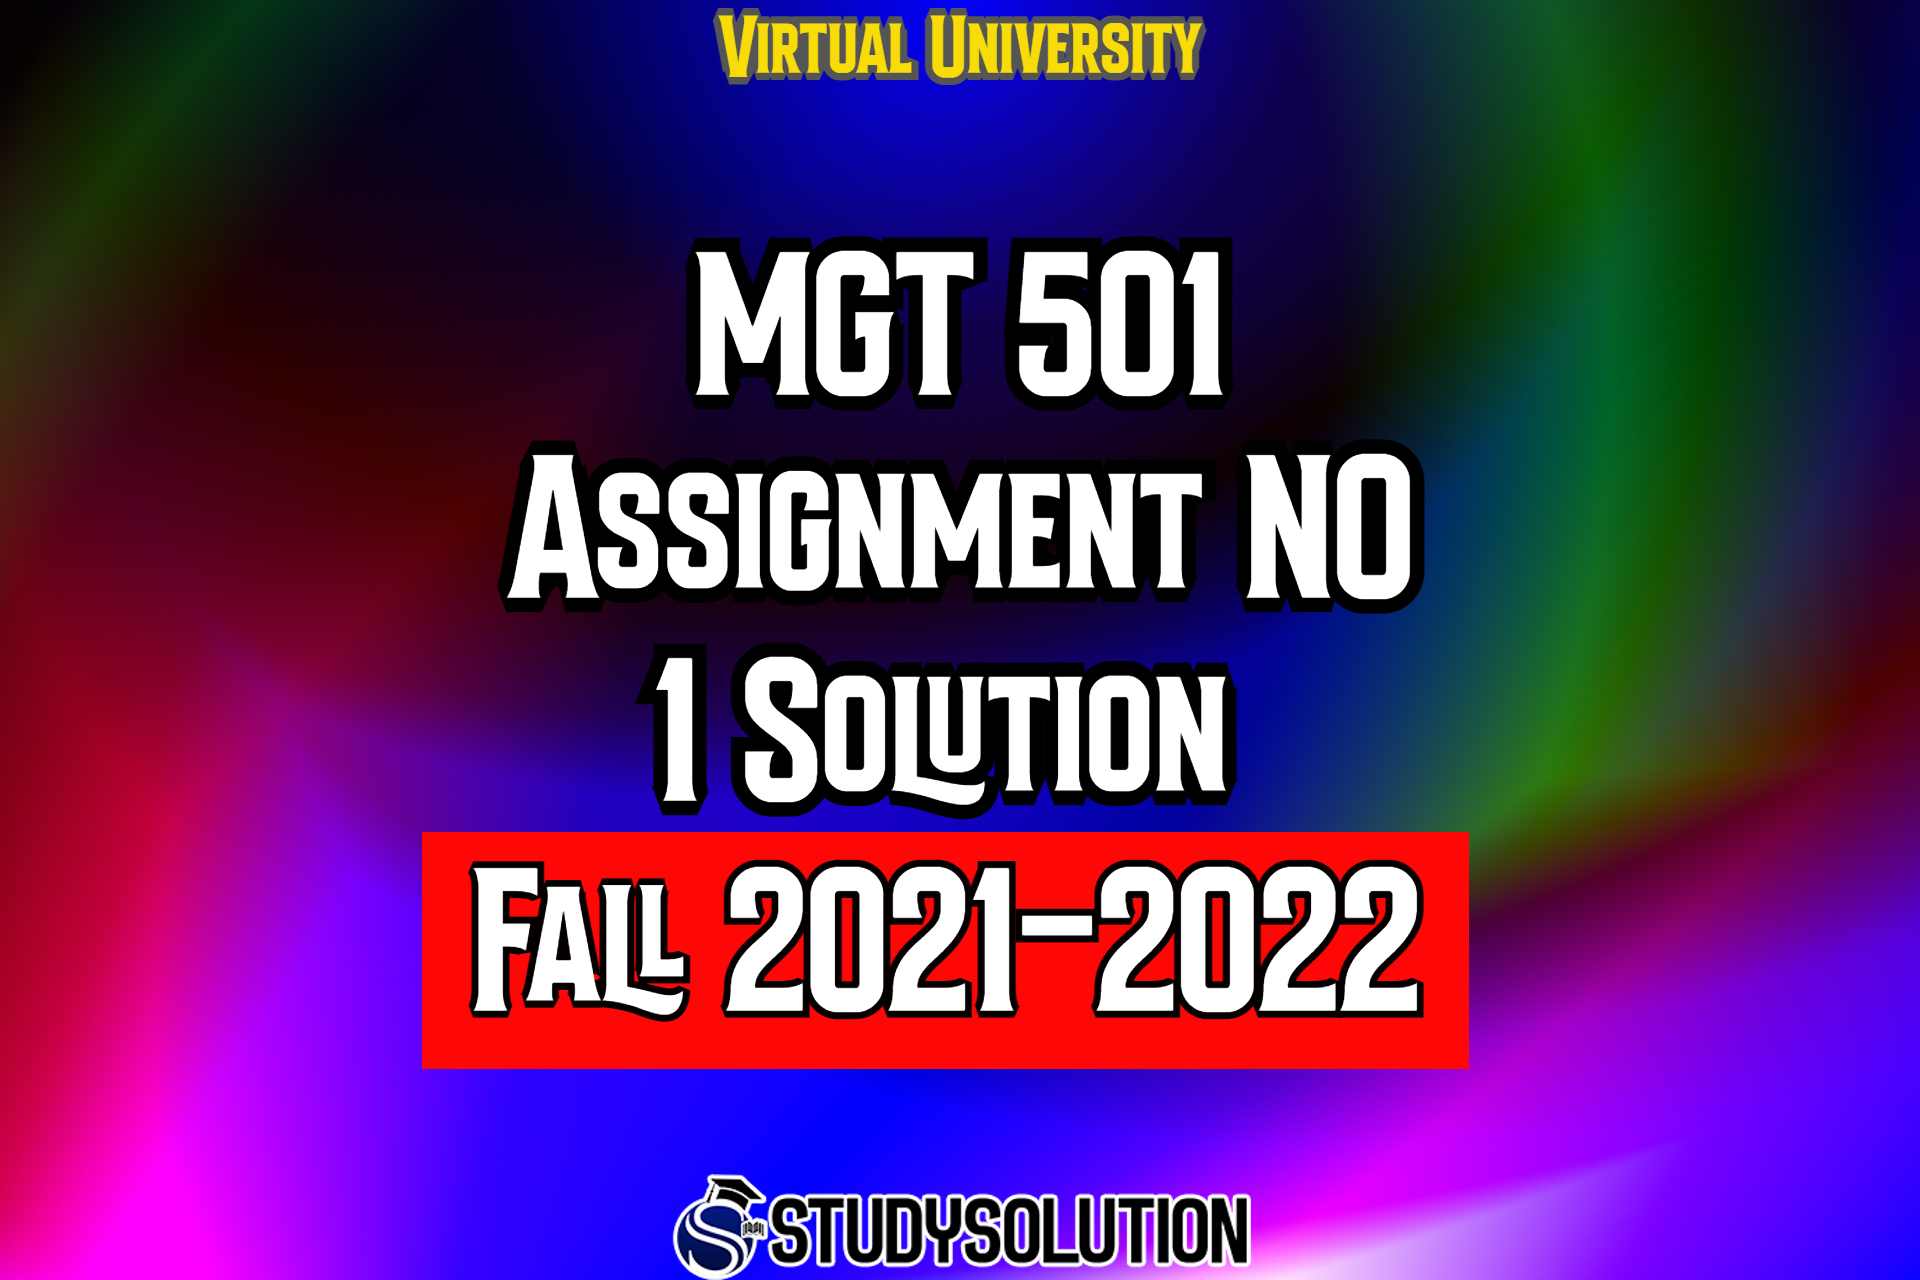 MGT501 Assignment No 1 Solution Fall 2022